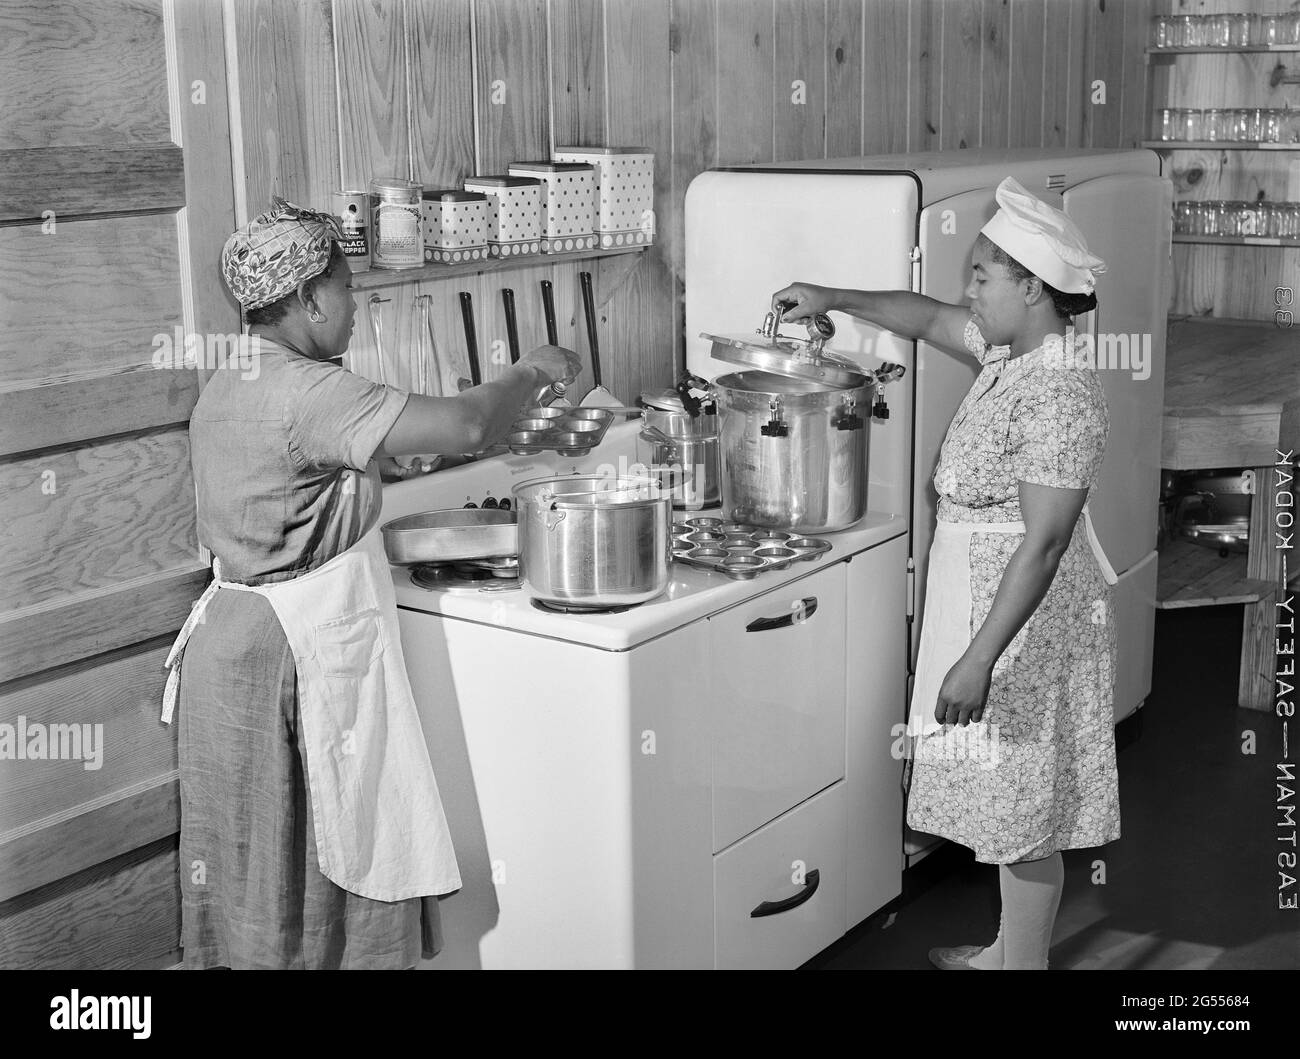 Two Female Workers preparing Hot Lunch for Agricultural Workers' Children in Kitchen of Day Nursery, Okeechobee Migratory Labor Camp, Belle Glade, Florida, USA, Marion Post Wolcott, U.S. Farm Security Administration, February 1941 Stock Photo